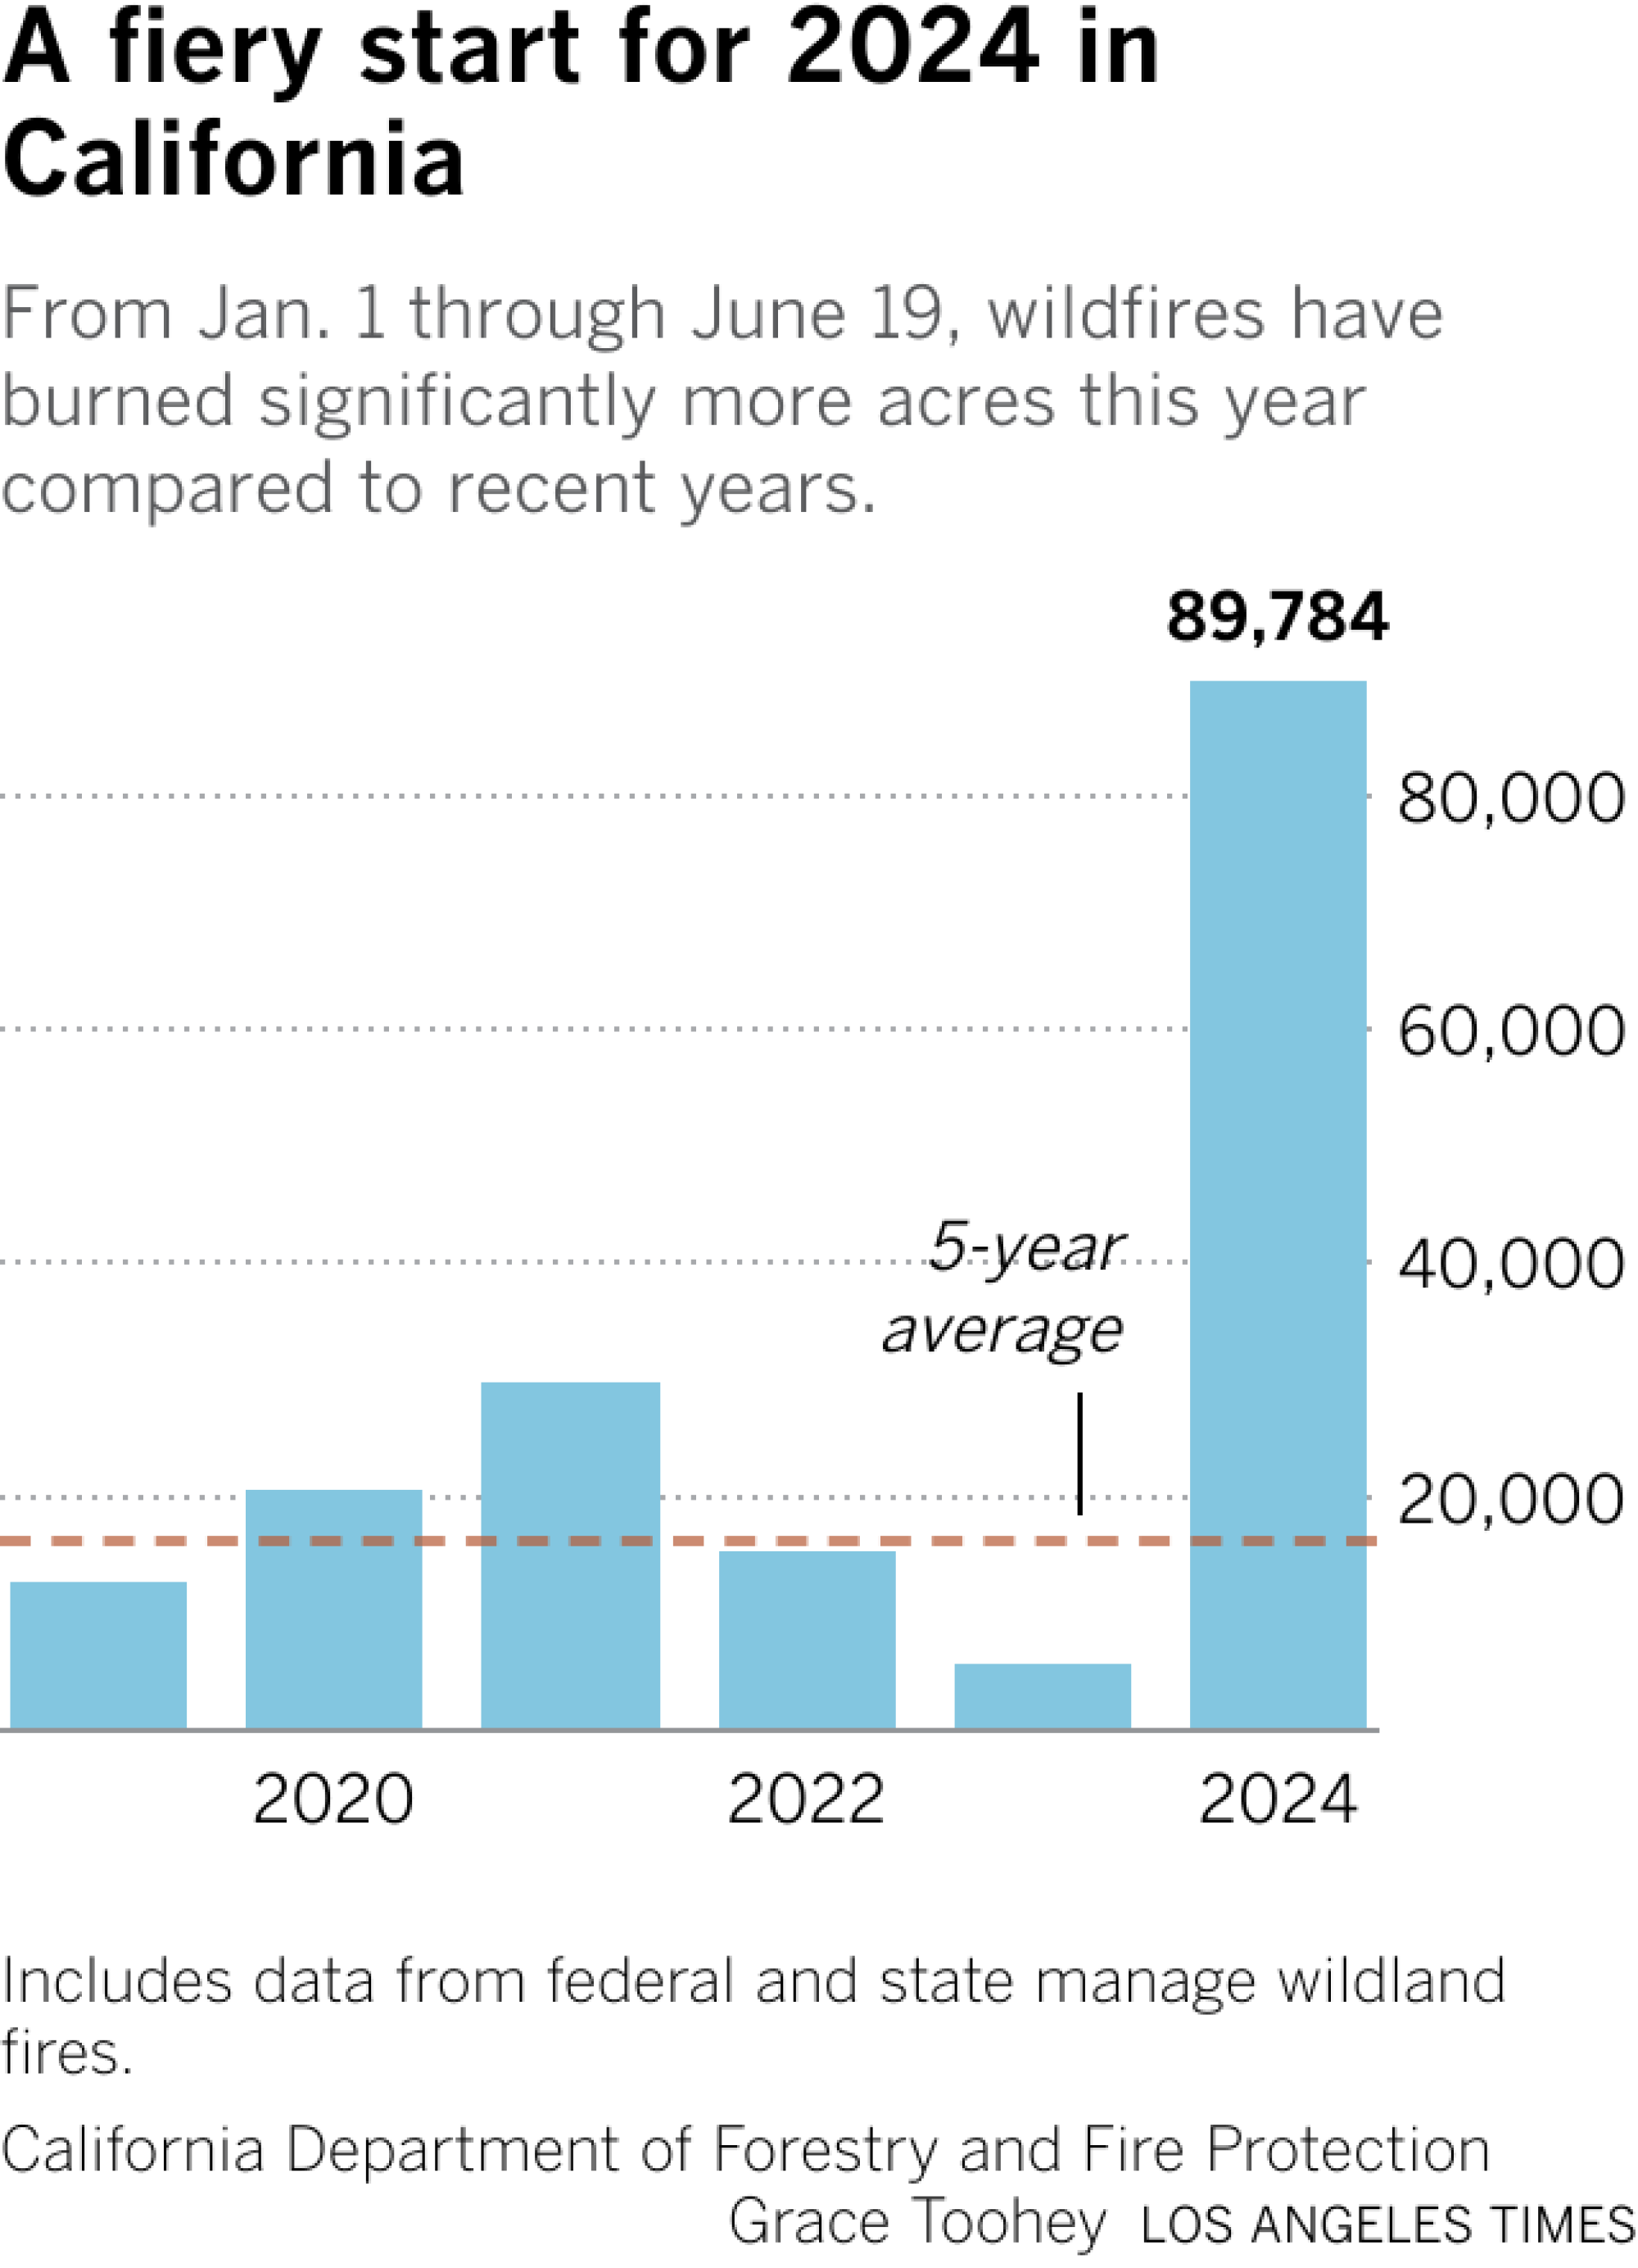 This year, wildfires in California burned nearly 90,000 acres before June 20. That's about five times more than the average for the same period over the past five years. 